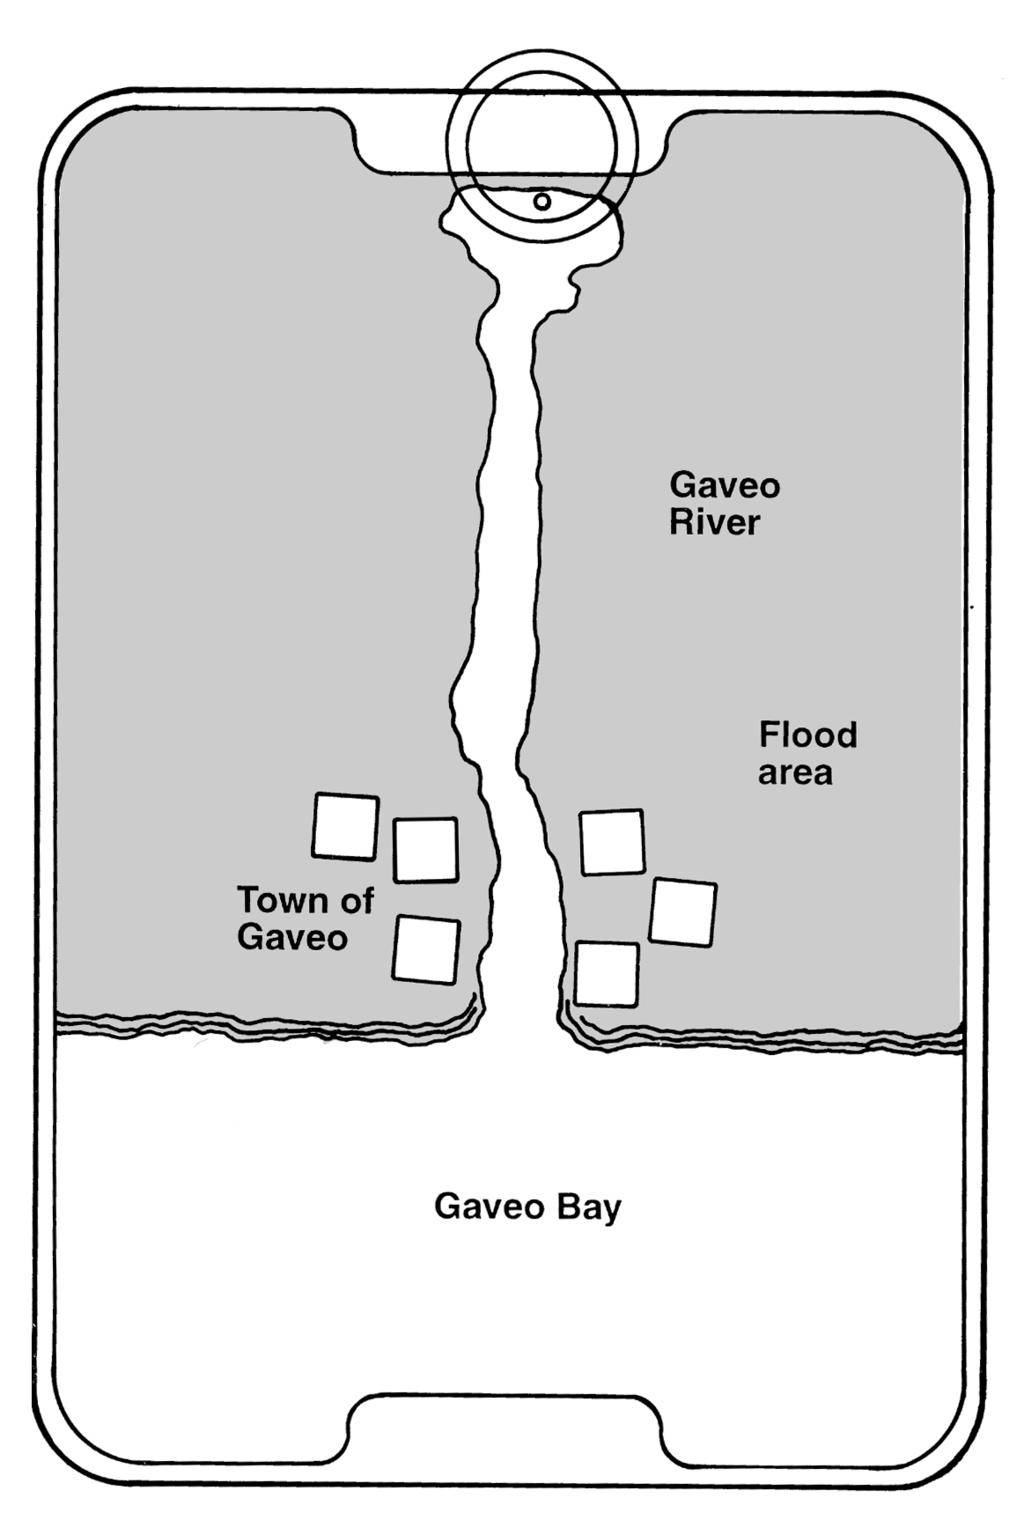 Record Sheet 12-A Name(s): Building a Dam, continued 3. Make a Plan: Look at the map. Consider the location of the town of Gaveo. Where would you build your dam to protect the town from flooding?